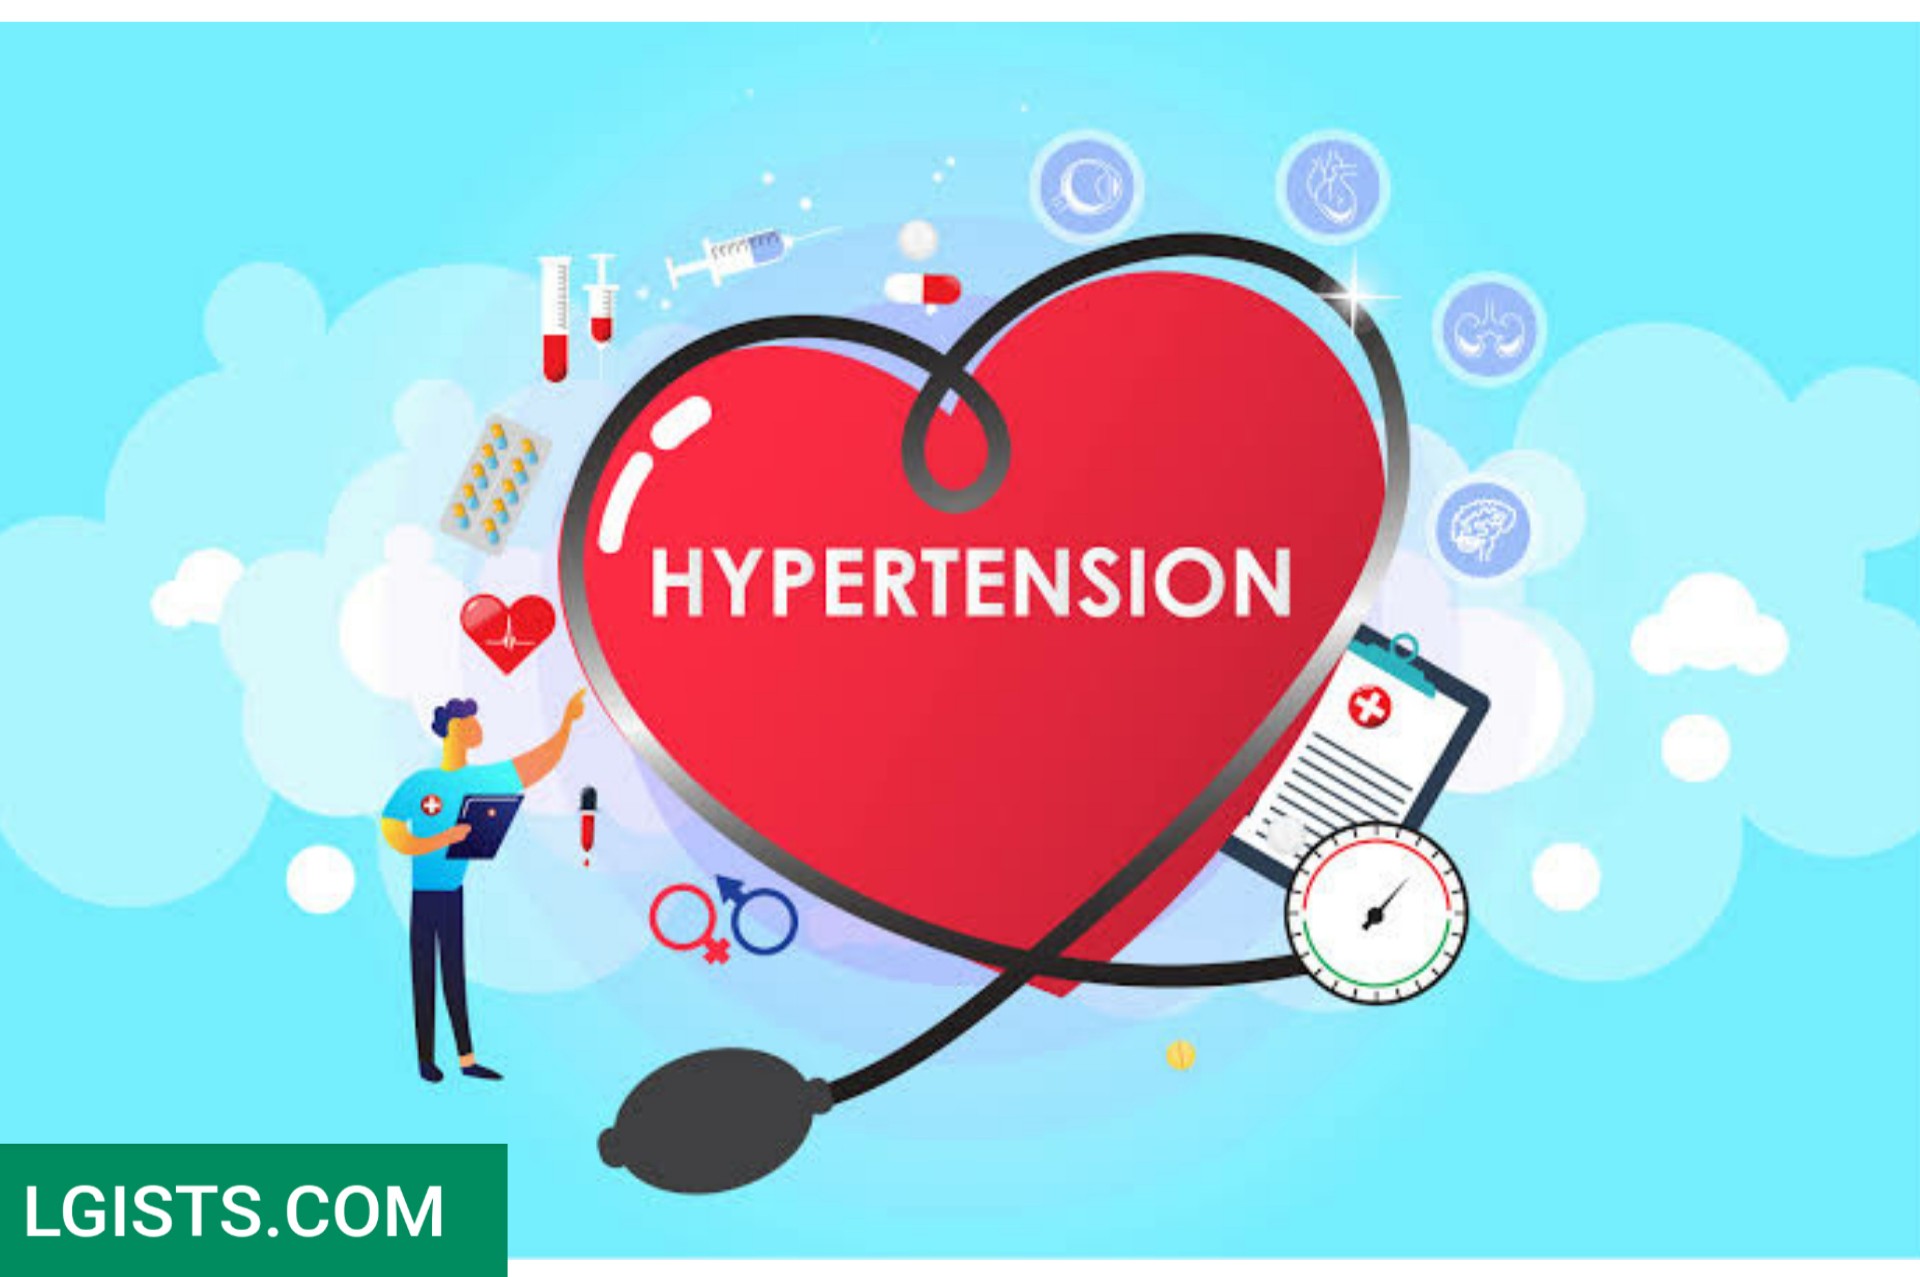 Hypertension therapy